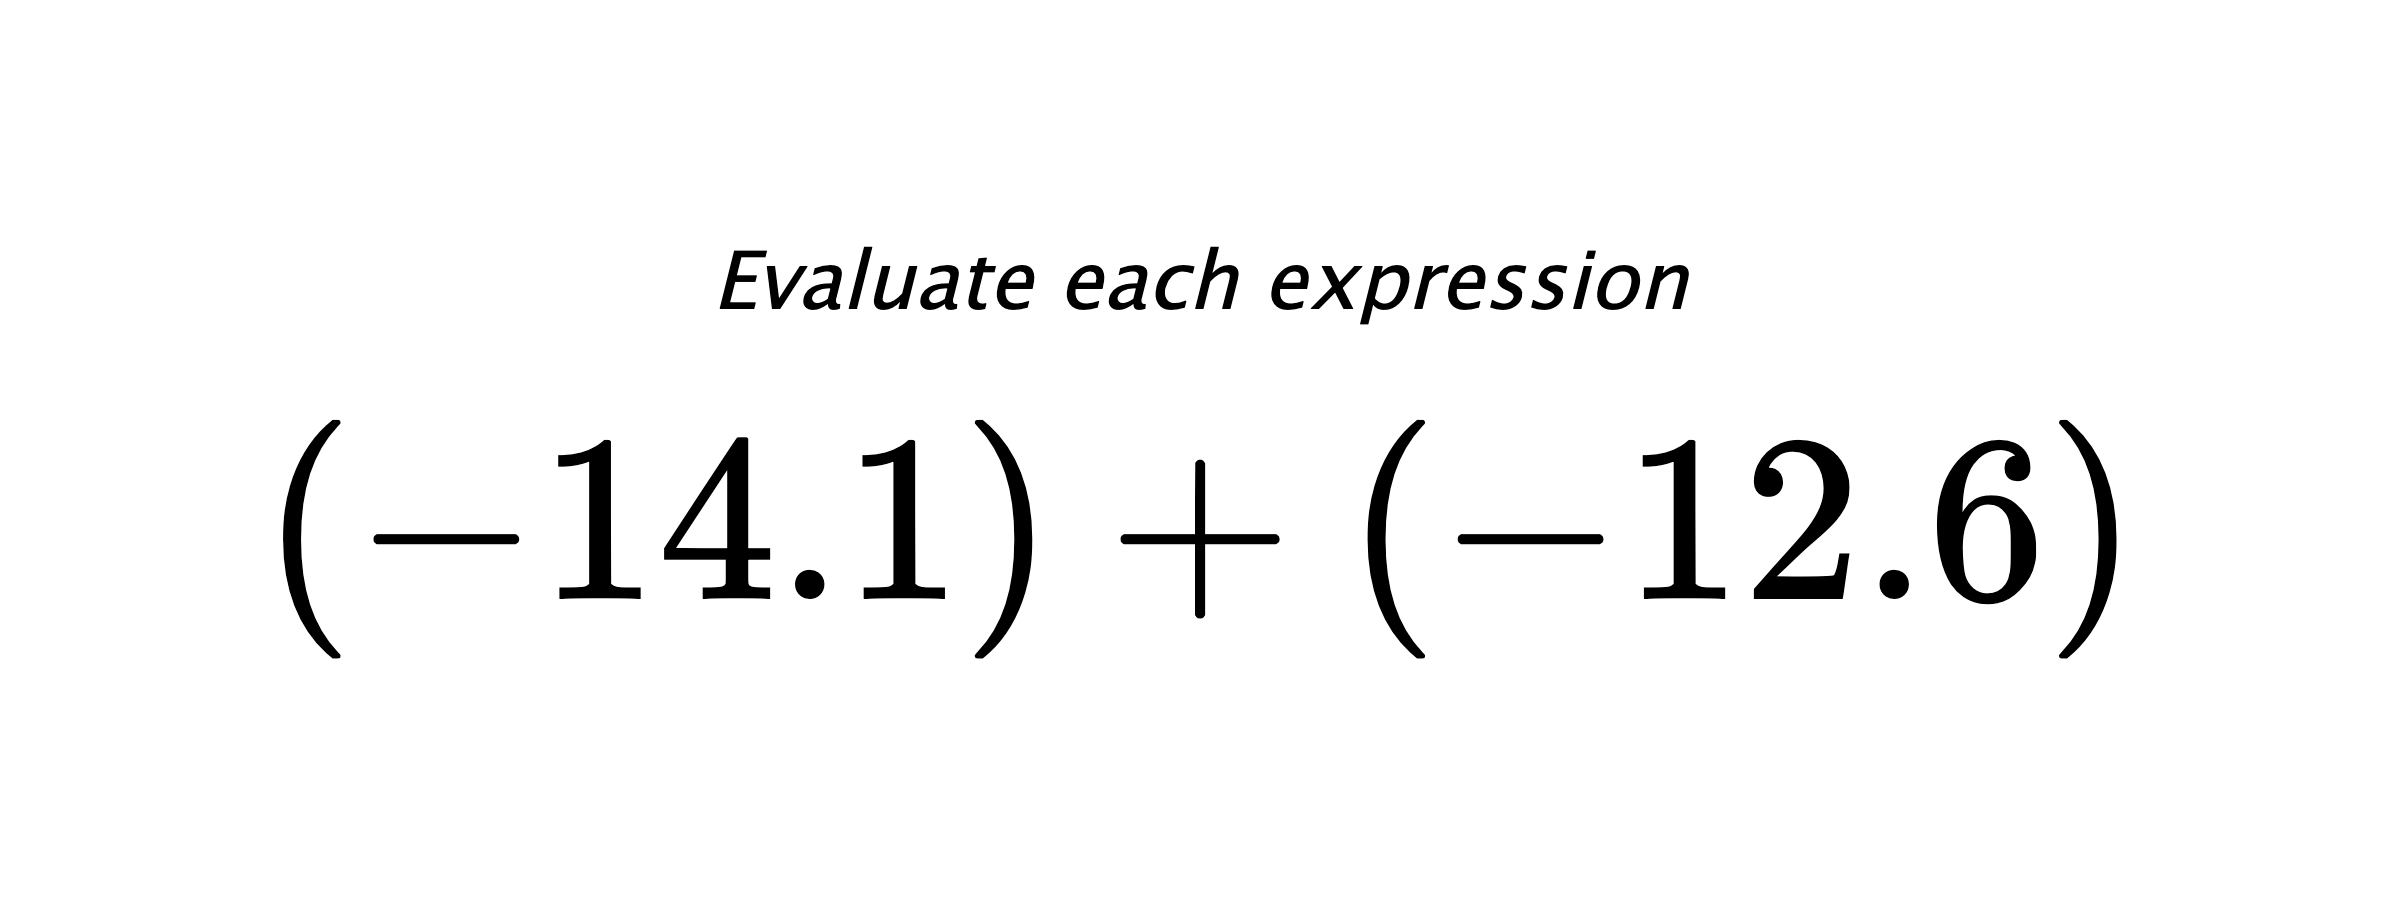 Evaluate each expression $ (-14.1)+(-12.6) $